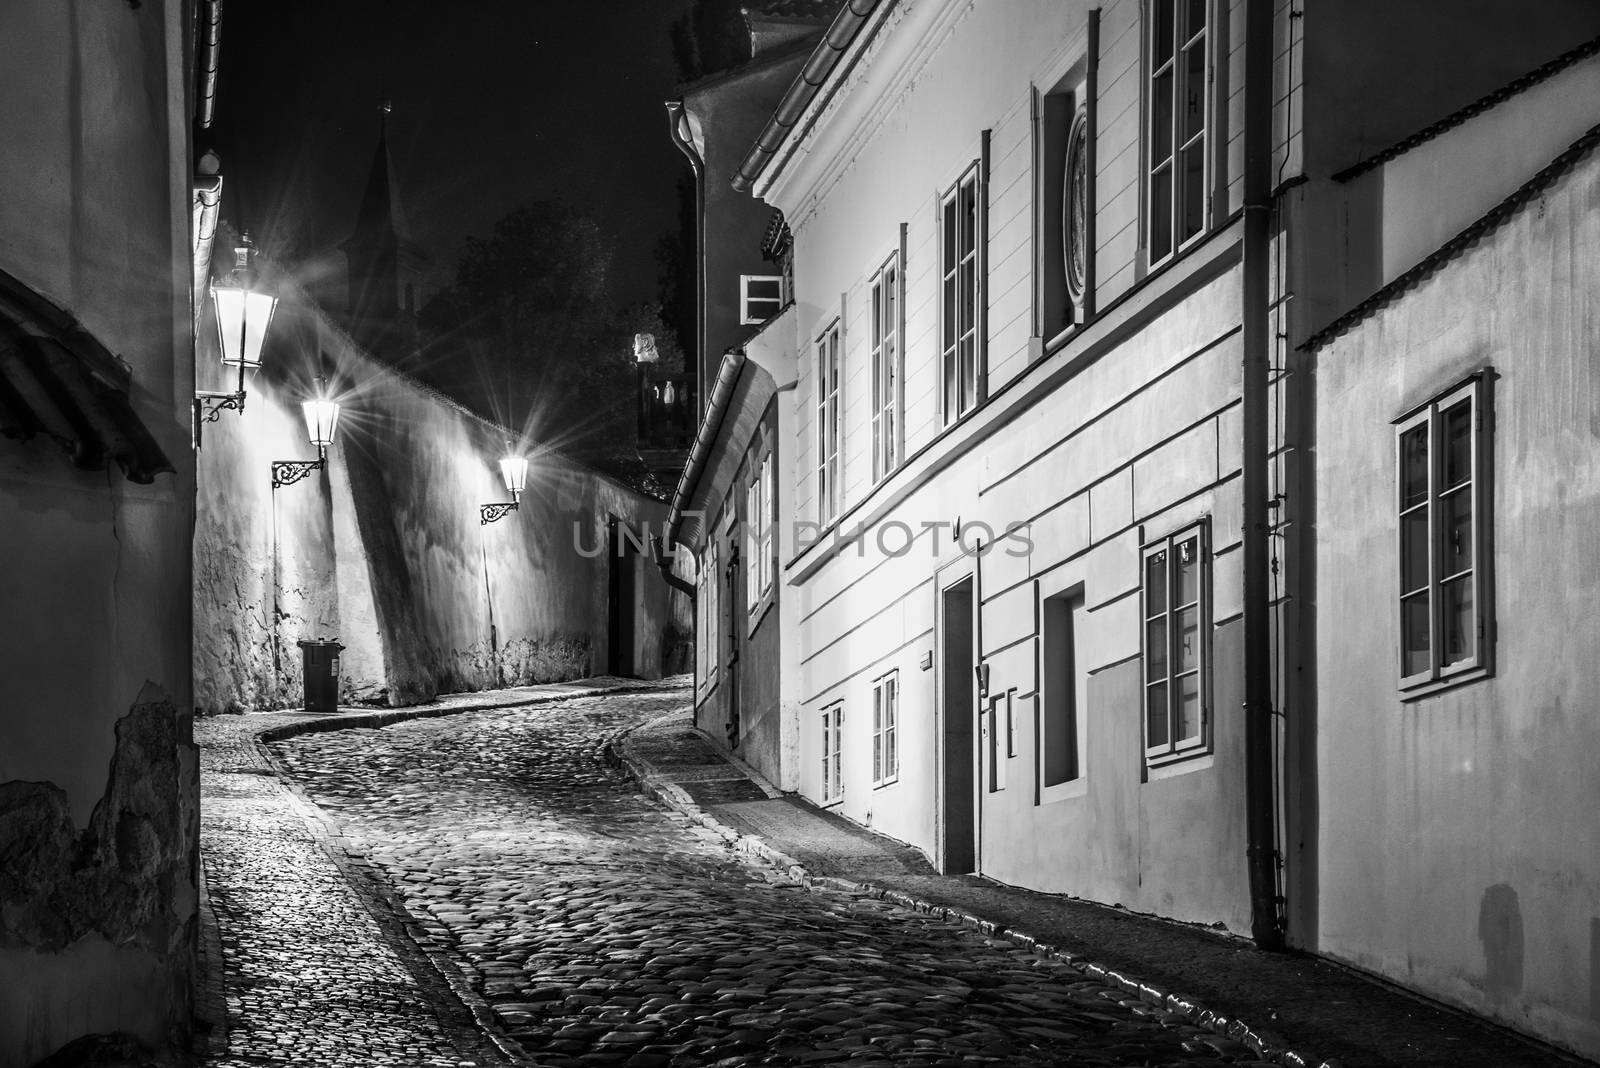 Narrow cobbled street in old medieval town with illuminated houses by vintage street lamps, Novy svet, Prague, Czech Republic. Night shot by pyty